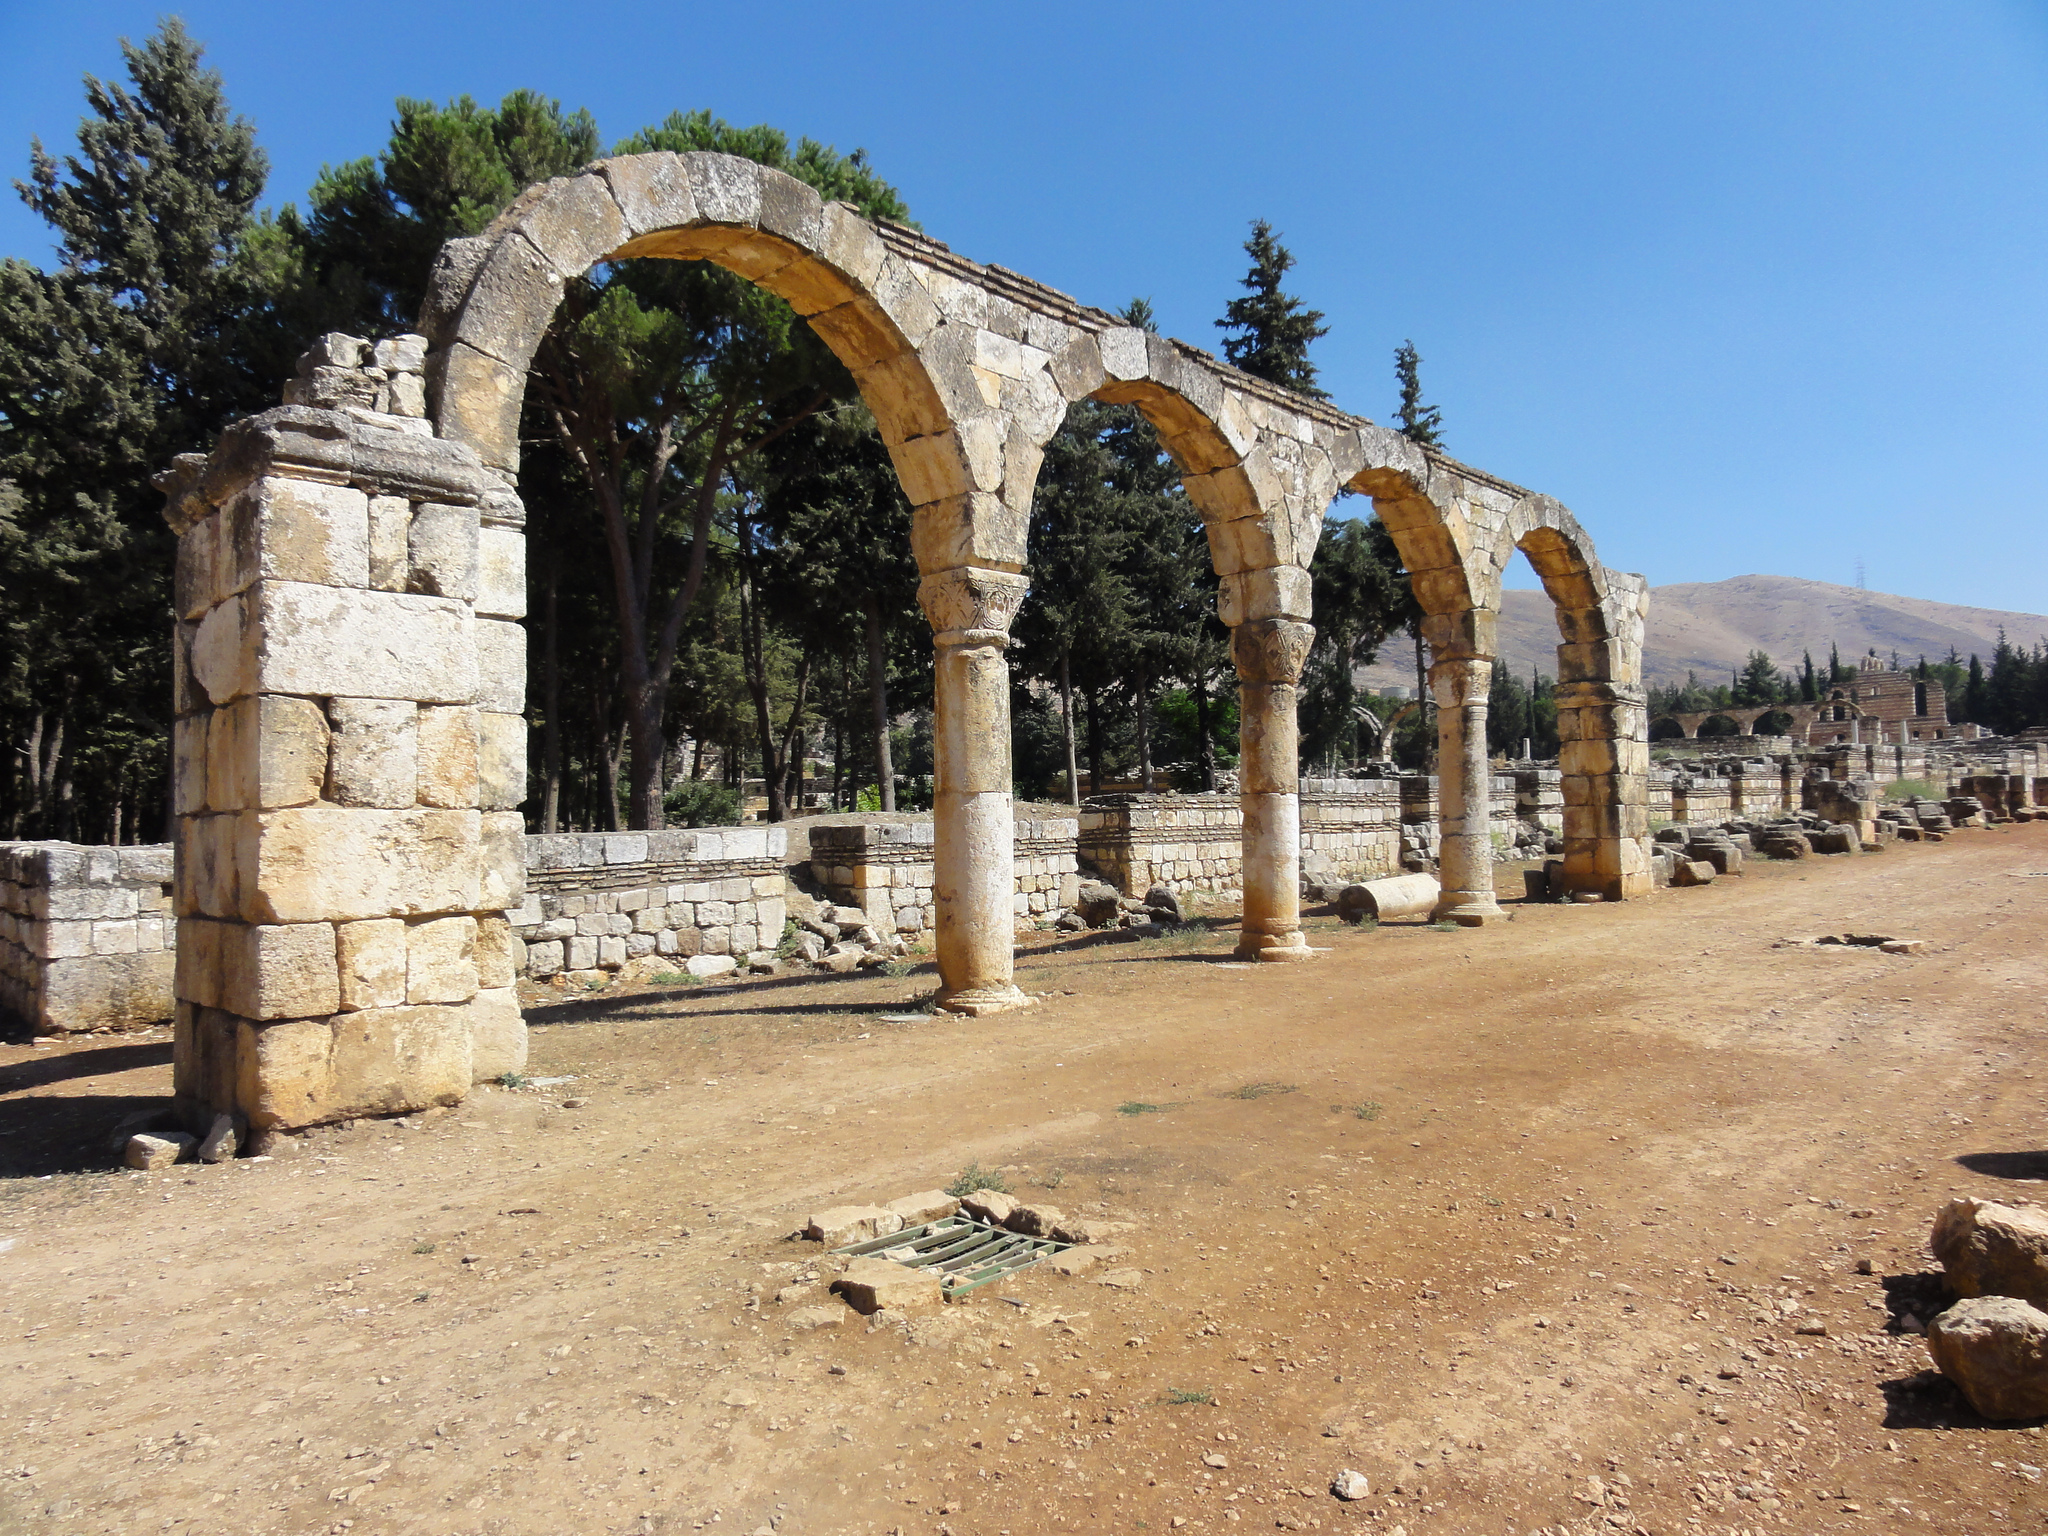 The ruins of Anjar reveal a very regular layout, reminiscent of the palace-cities of ancient times, and are a unique testimony to city planning under the Umayyads